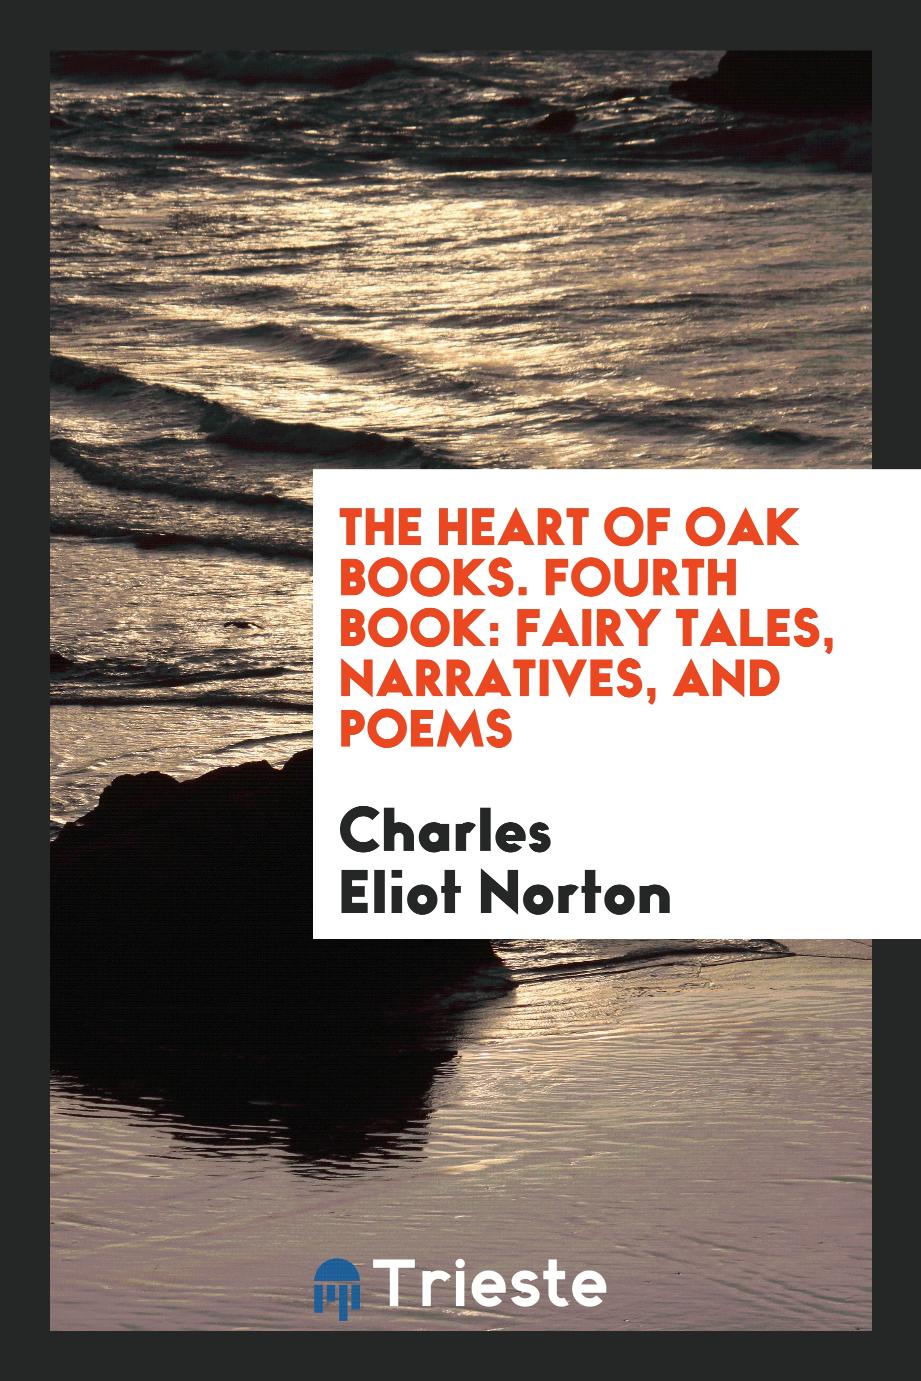 The Heart of Oak Books. Fourth Book: Fairy Tales, Narratives, and Poems